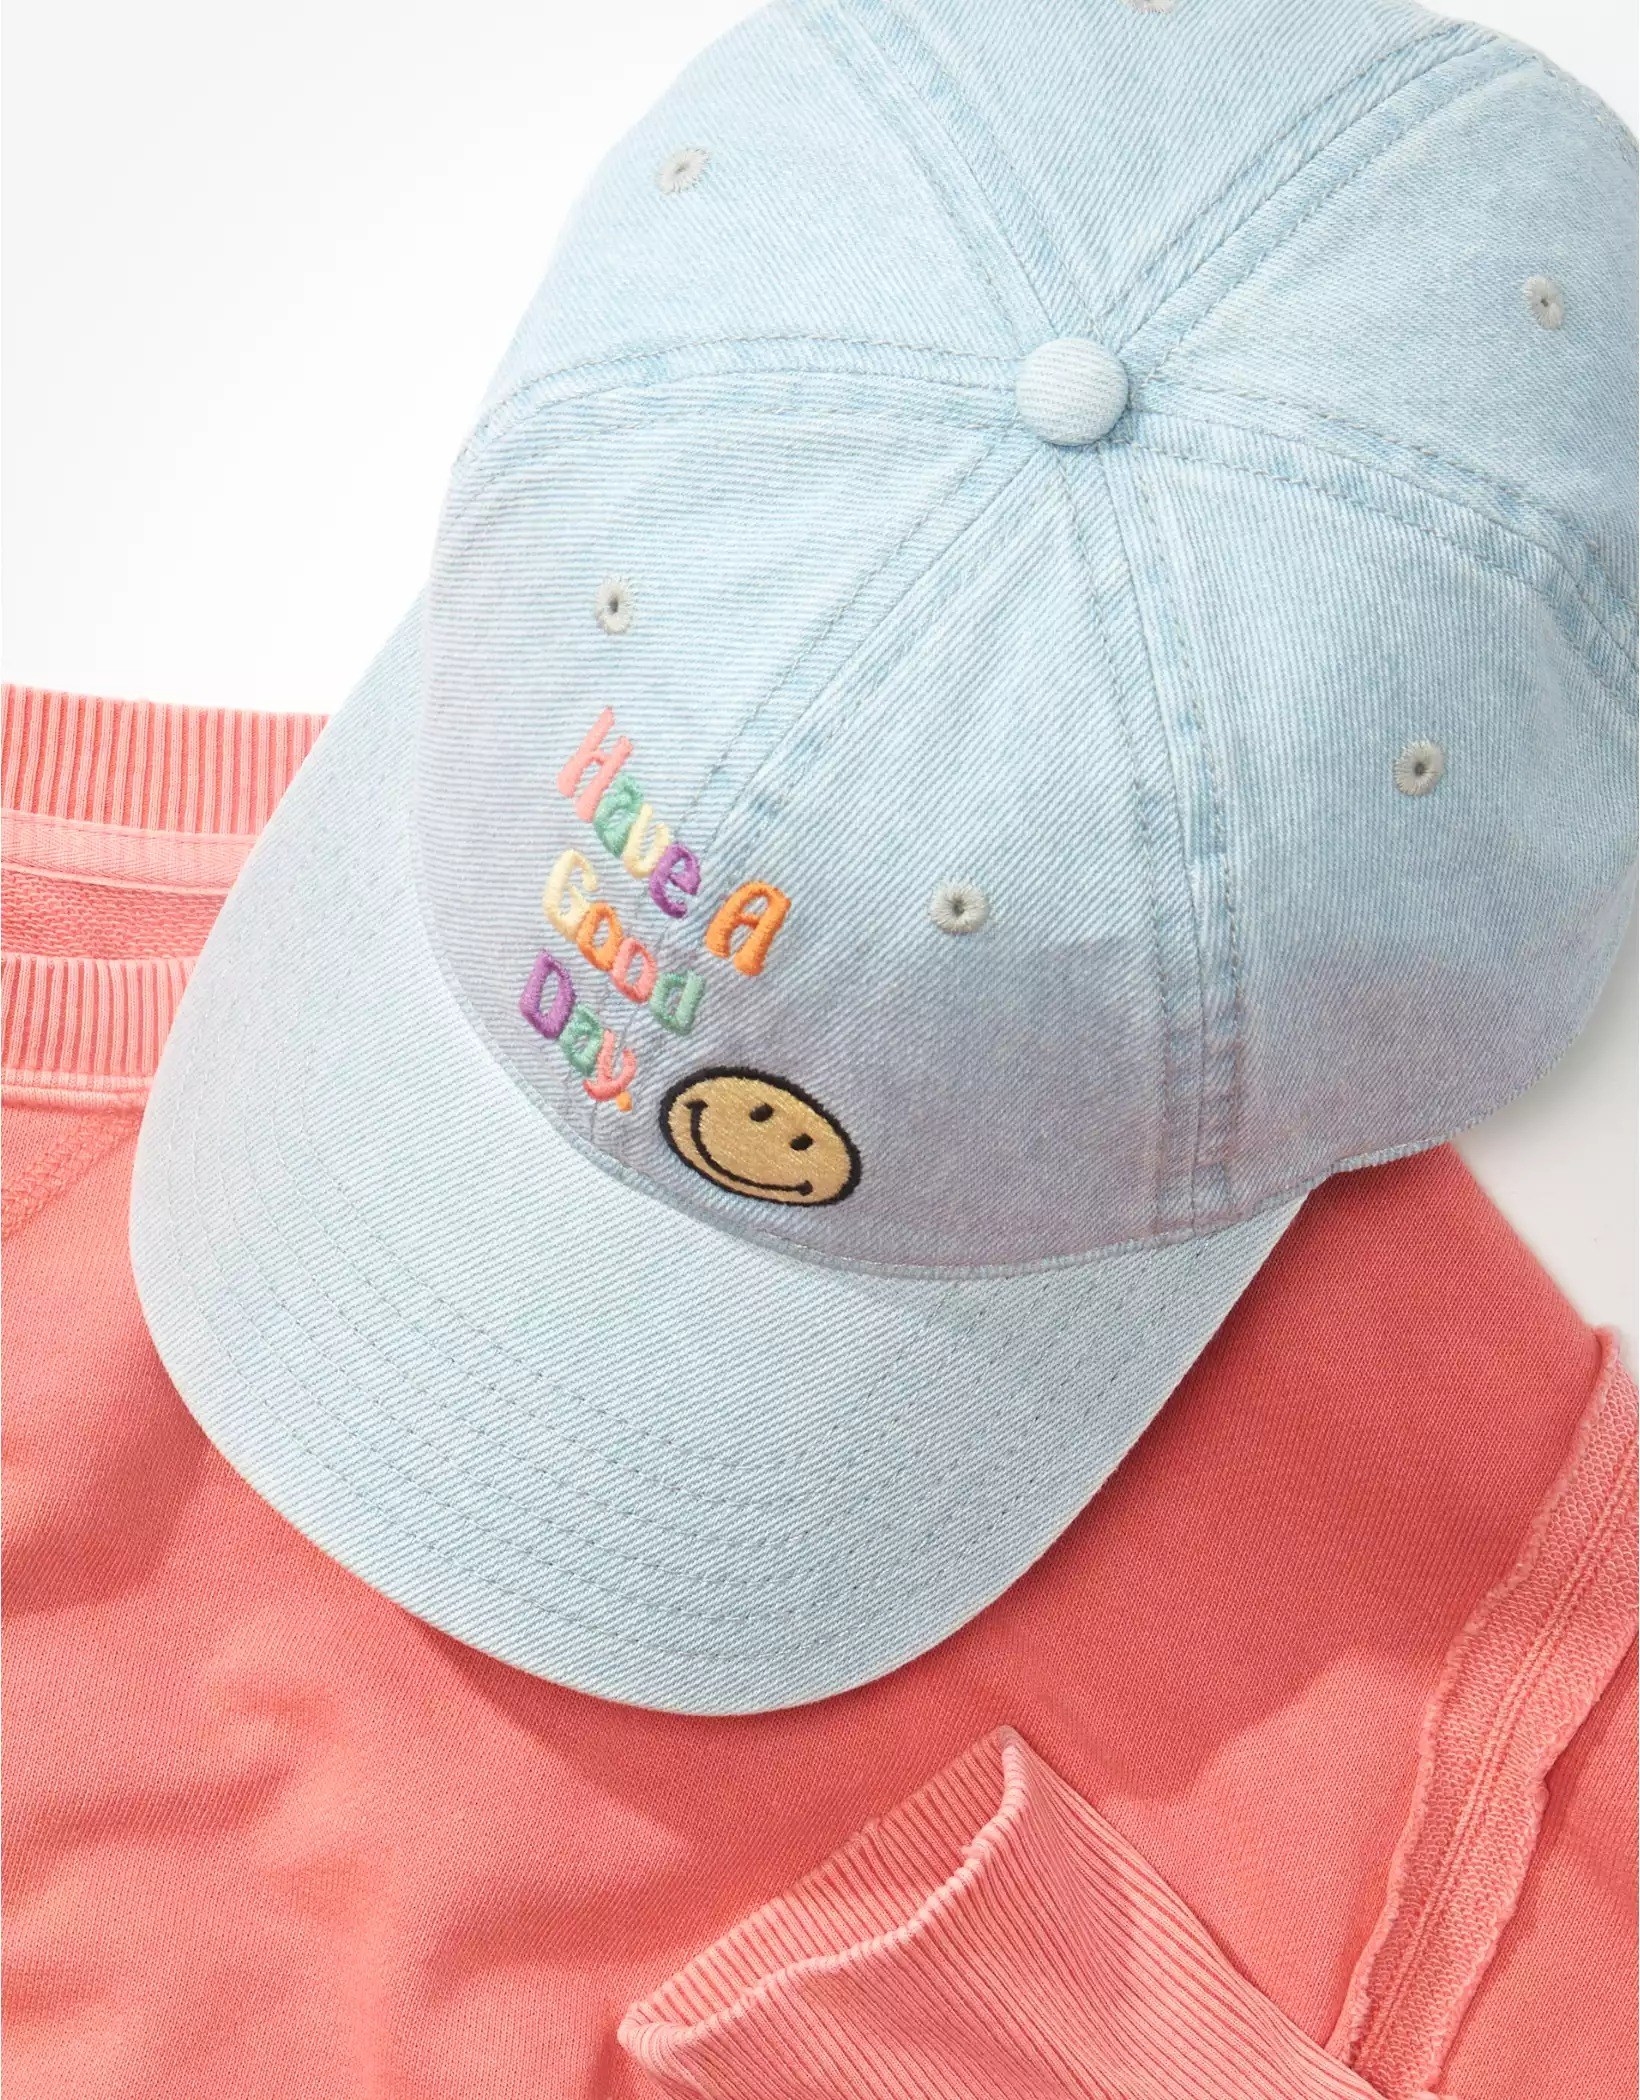 The denim cap with an embroidered smiley face and the words &quot;have a good day&quot; on the front sitting atop a salmon sweatshirt